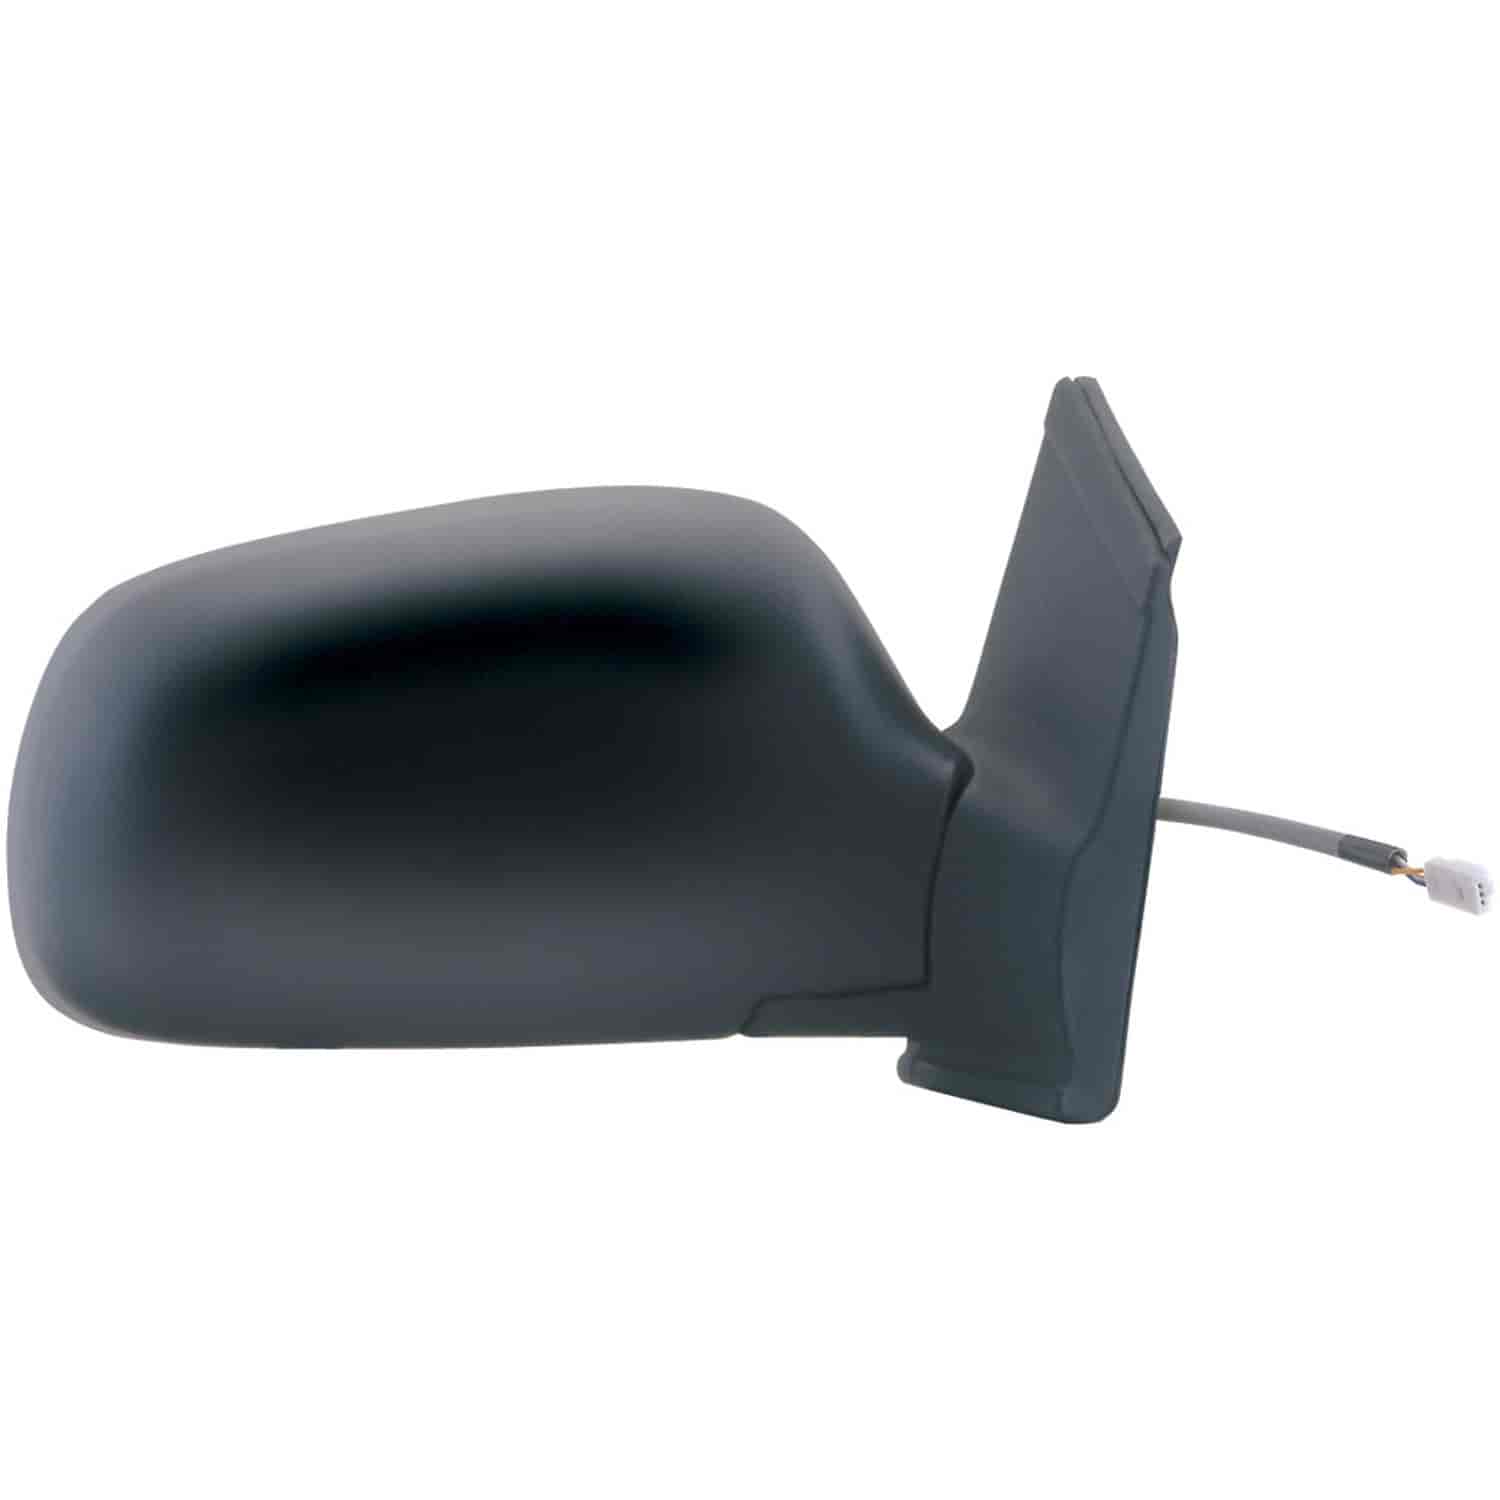 OEM Style Replacement mirror for 98-03 Toyota Sienna passenger side mirror tested to fit and functio